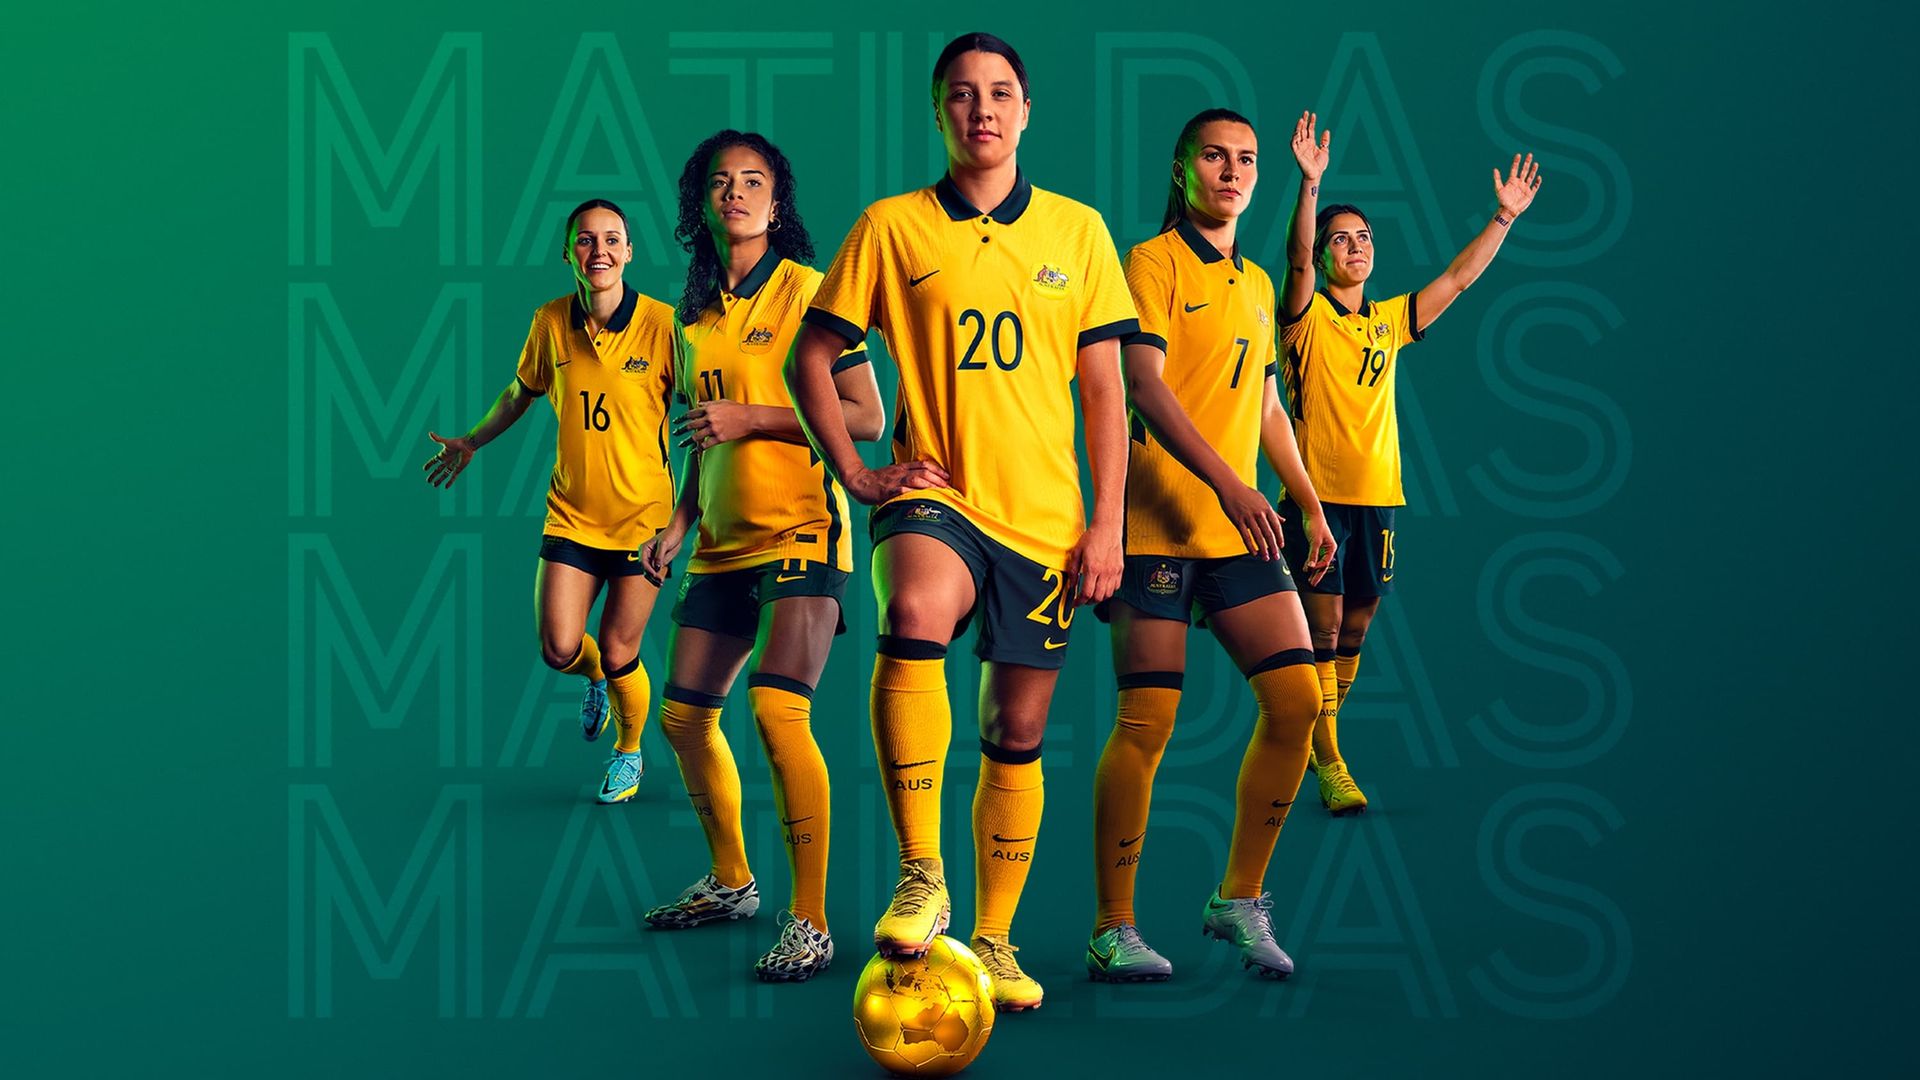 Matildas: The World at Our Feet background